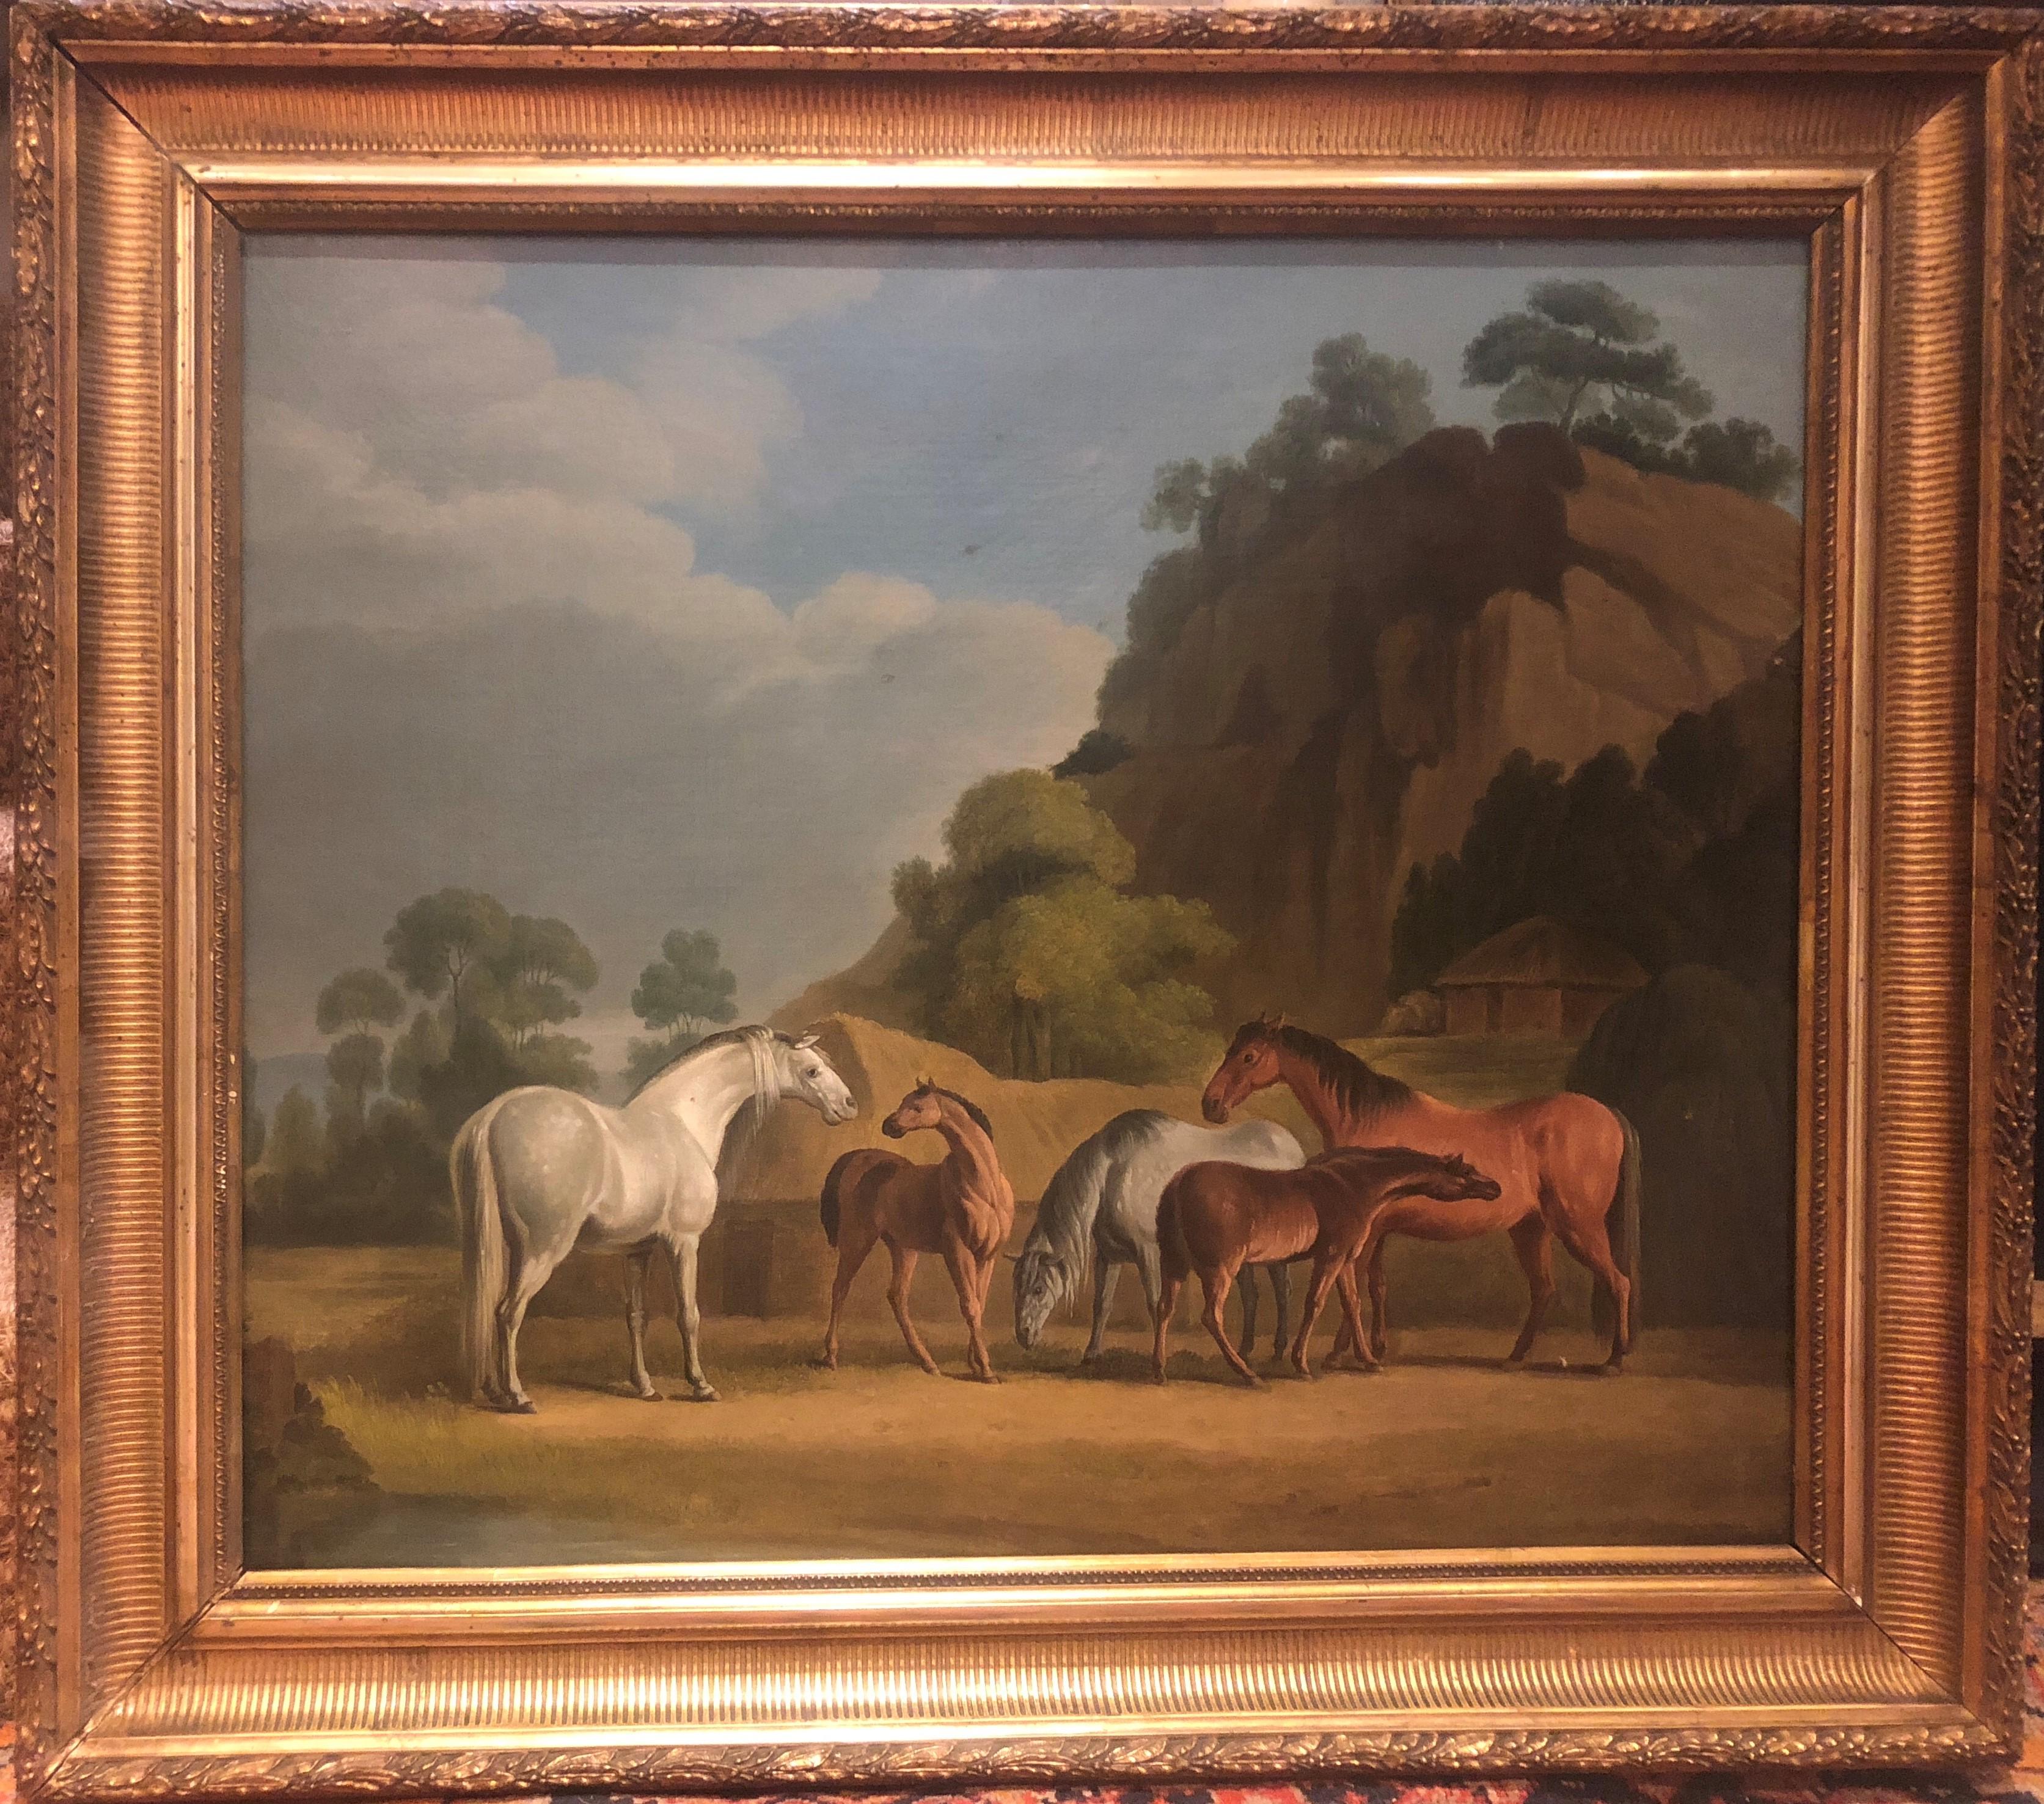 Daniel Clowes Landscape Painting – 19th Century Oil painting of horses - Mares and Foals in a Landscape